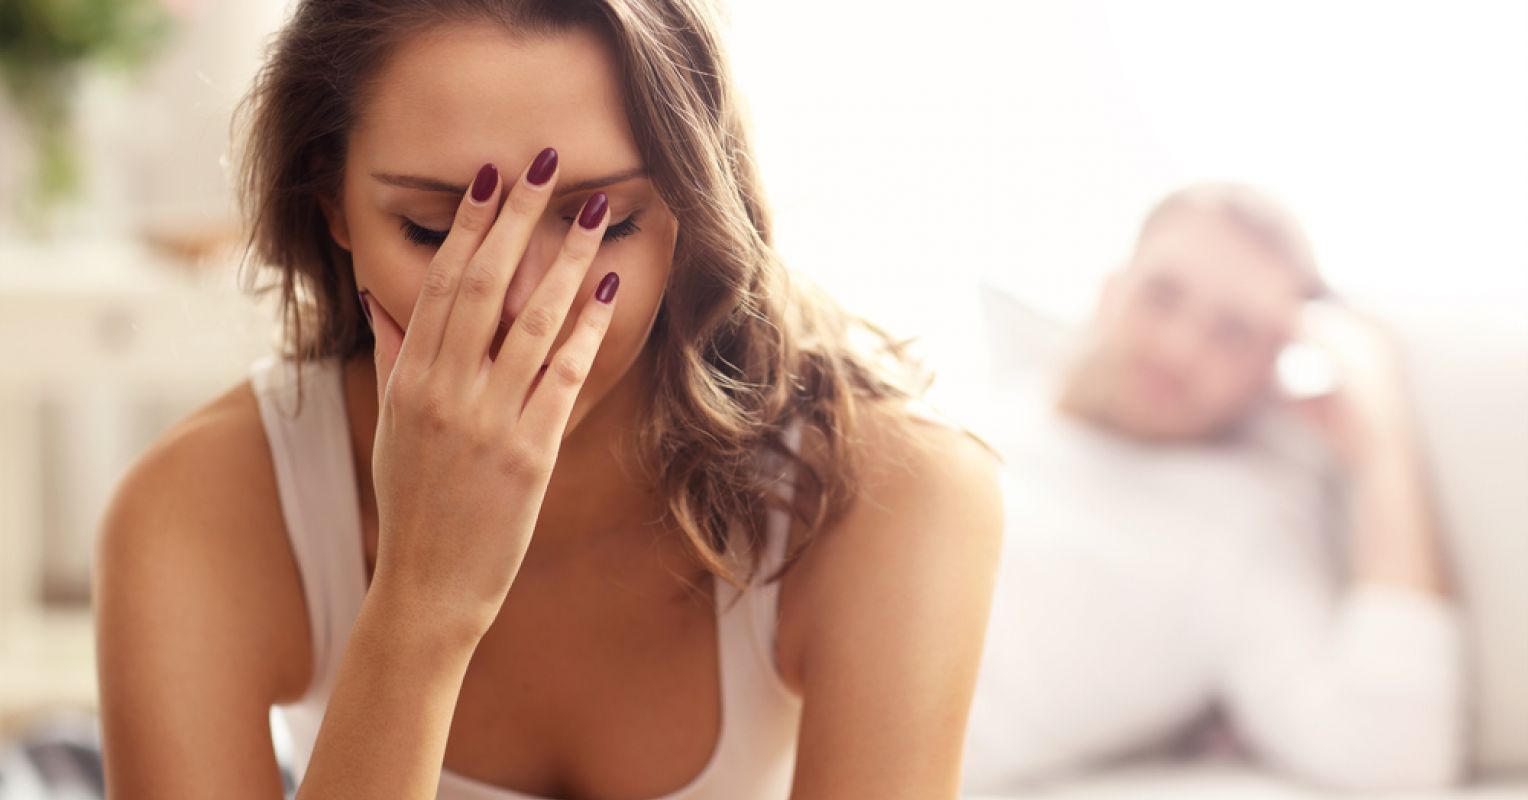 1528px x 800px - Should You Tell Your Partner You Cheated? | Psychology Today